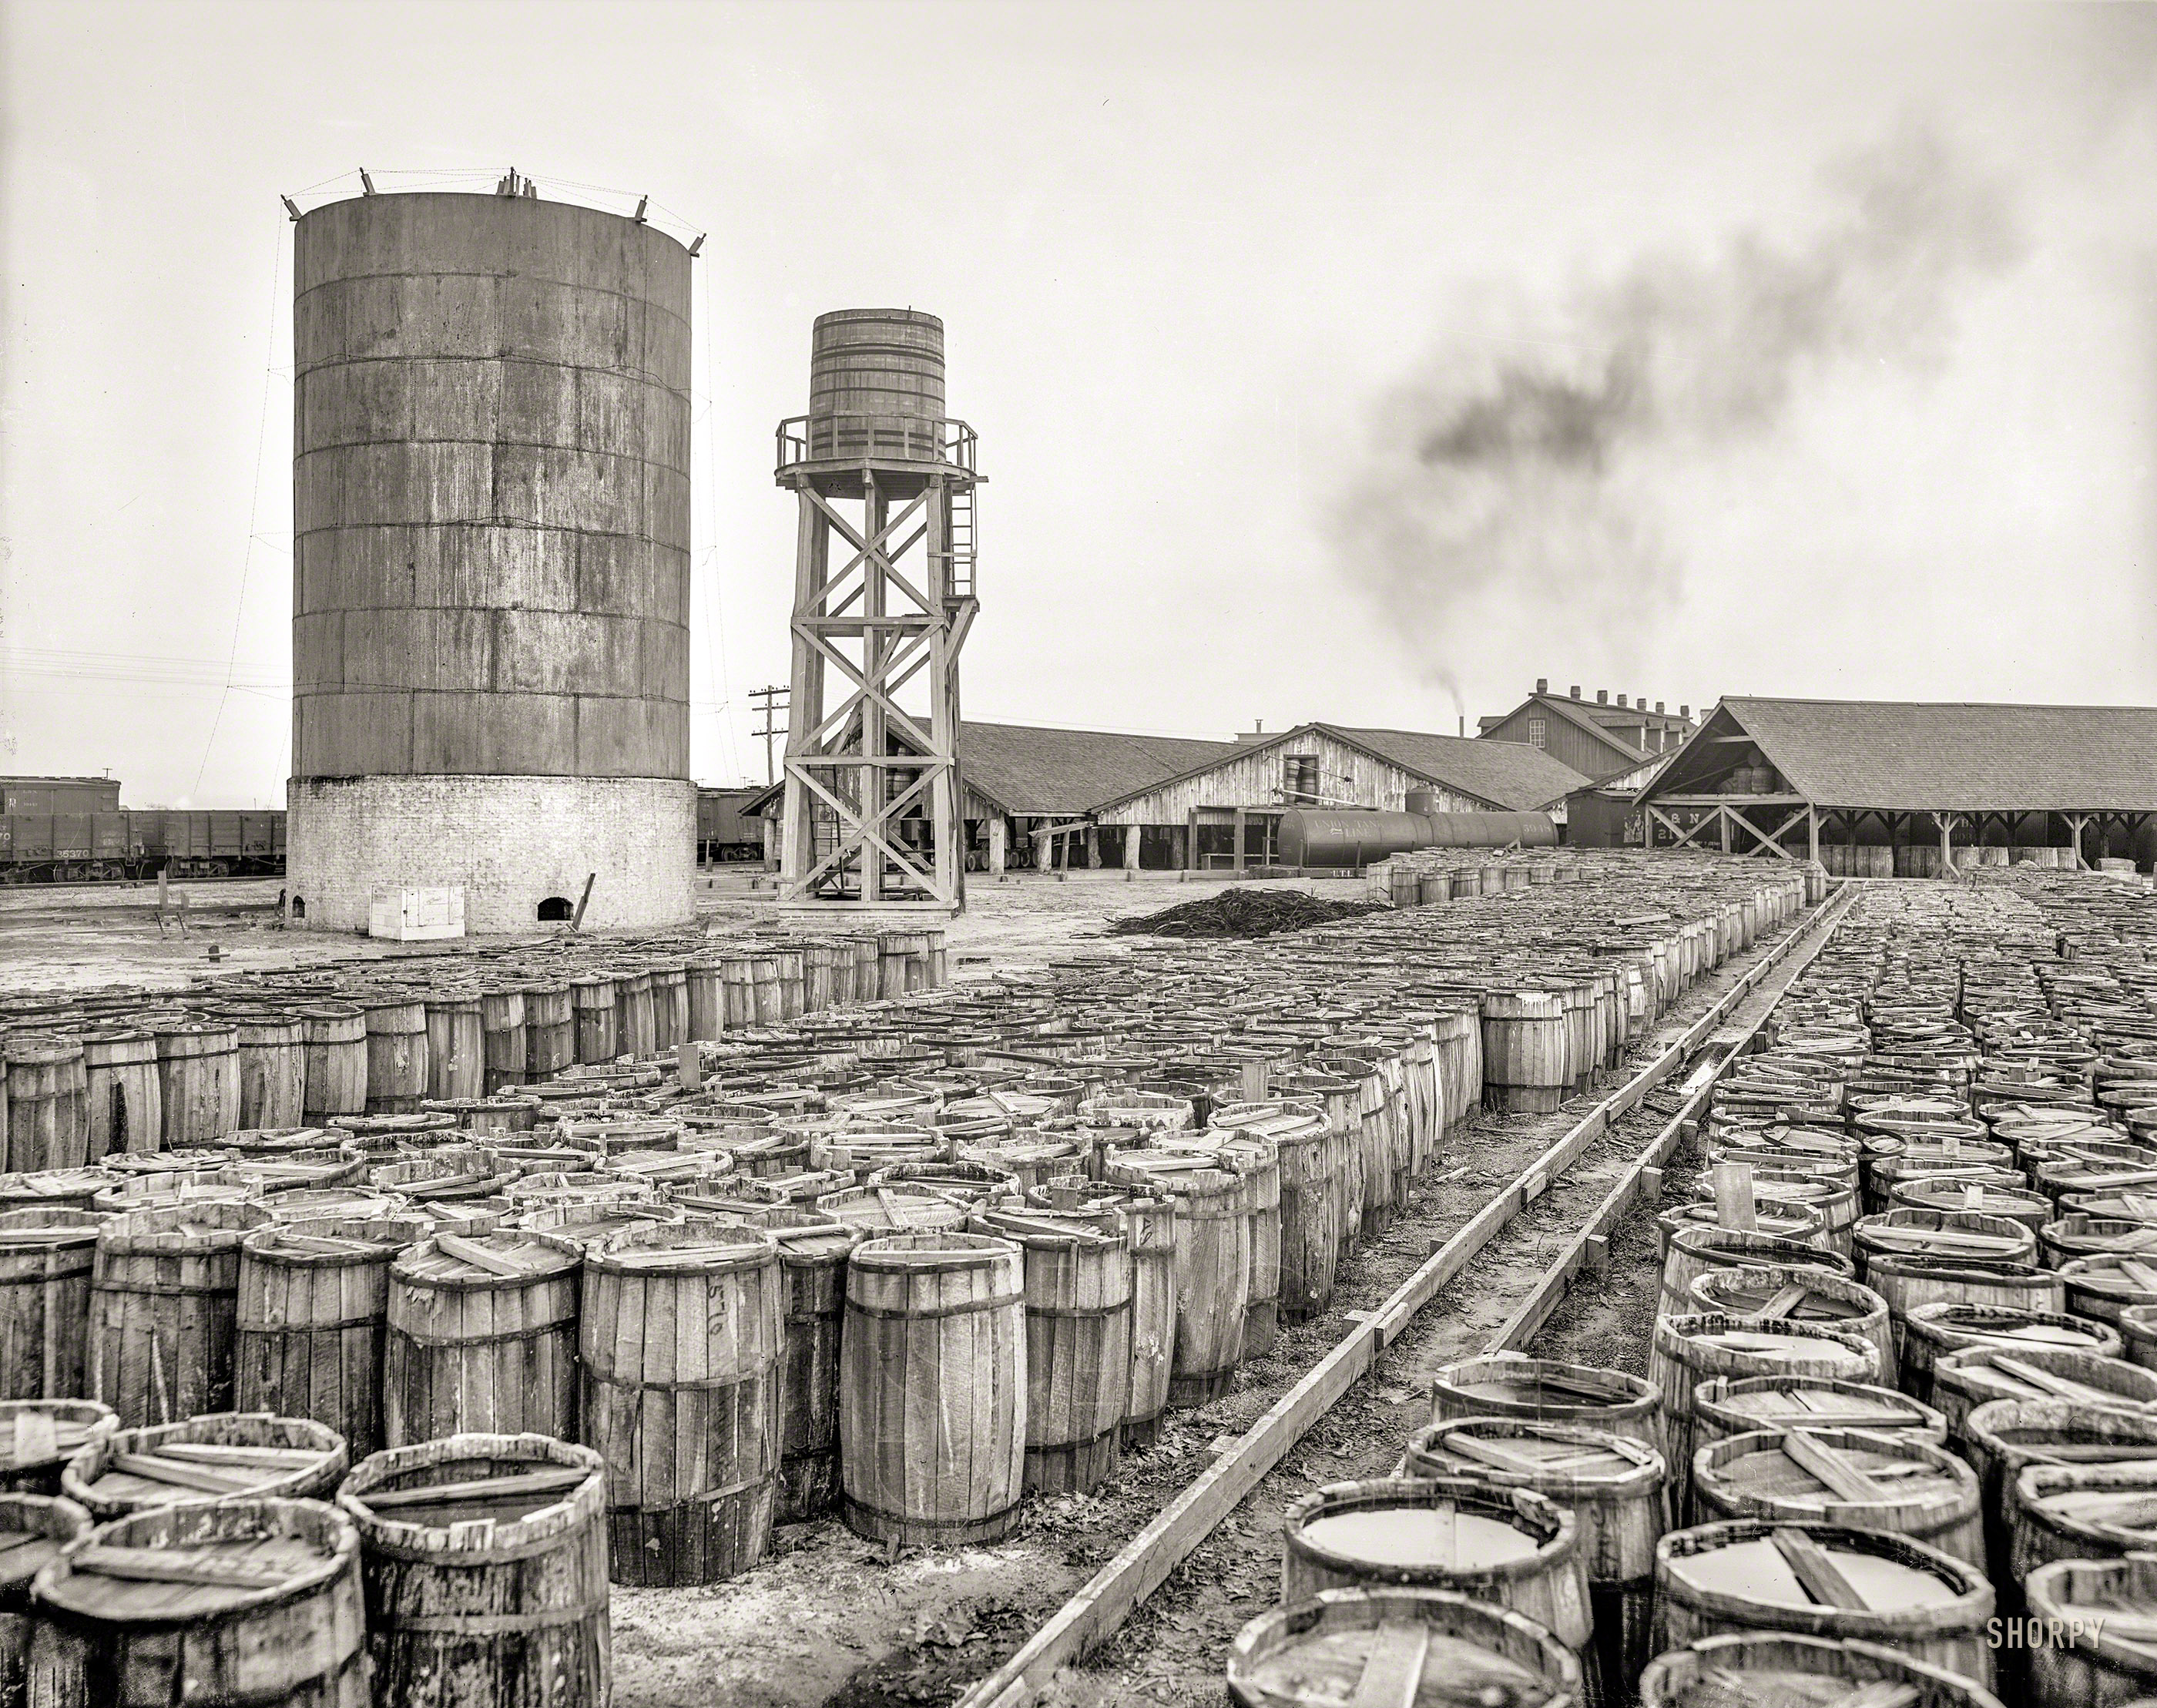 1903. "Plant of the Consolidated Naval Stores Company, Pensacola, Florida. Resin and turpentine." 8x10 inch dry plate glass negative. View full size.